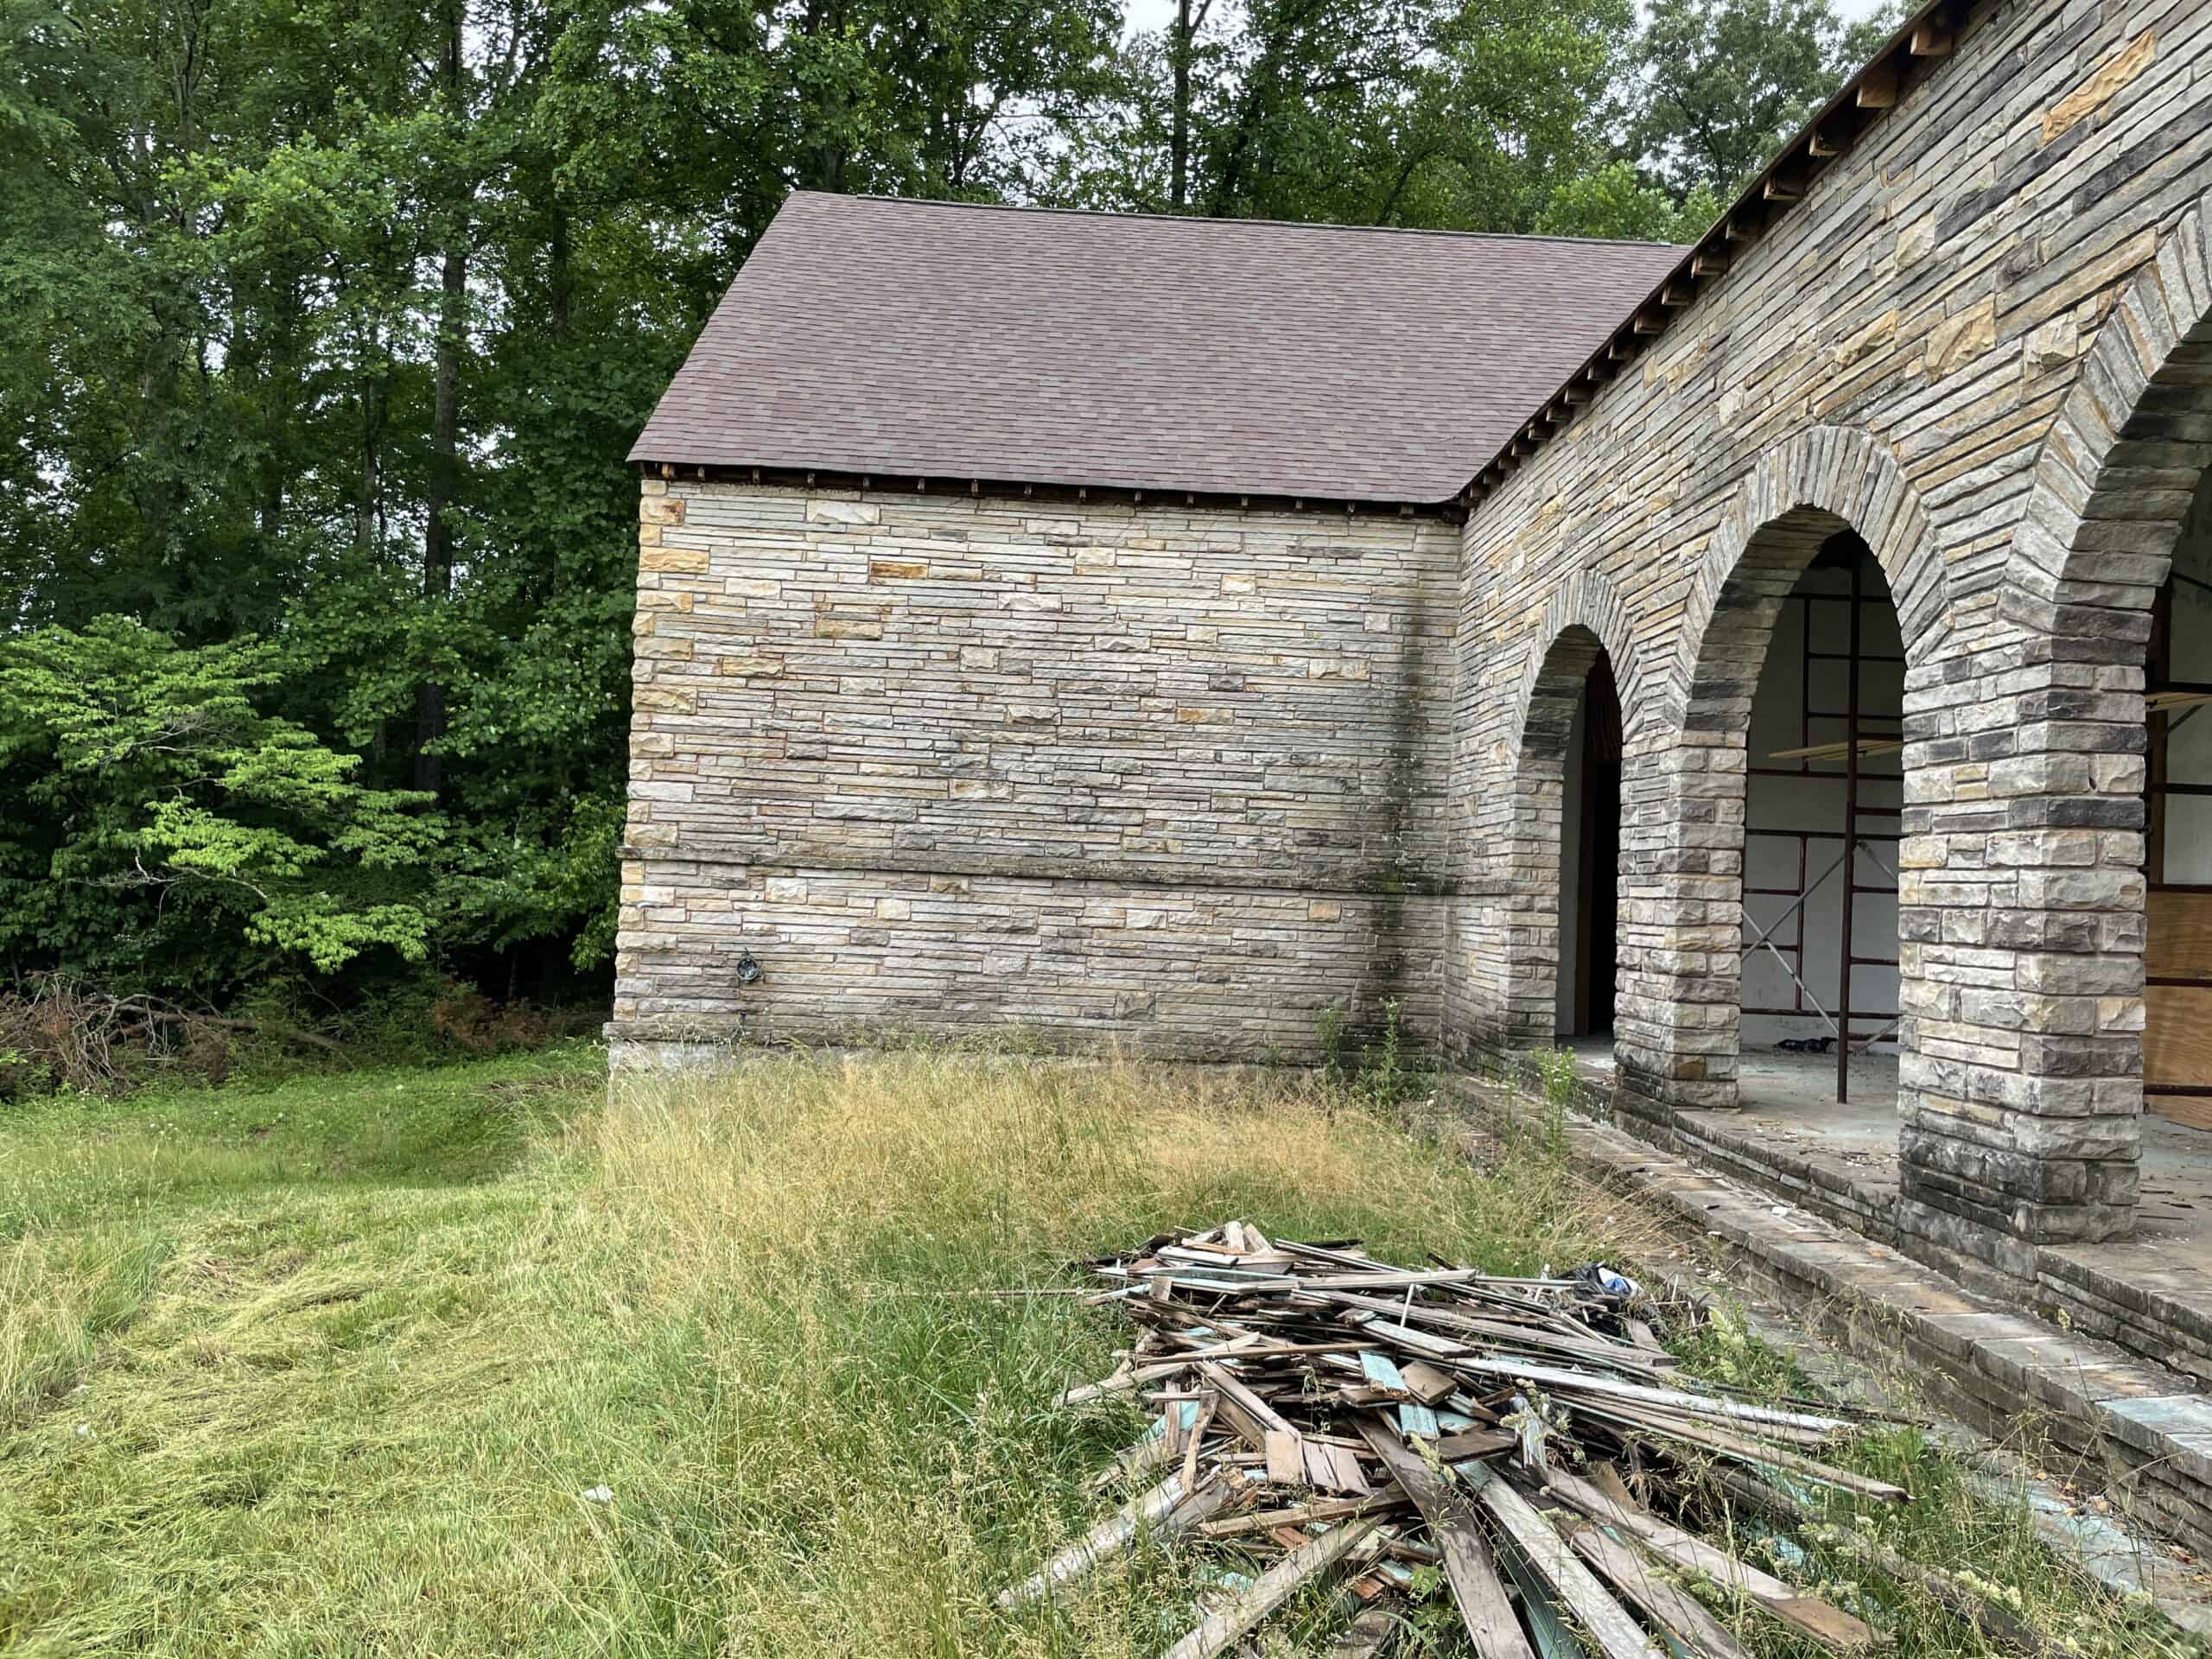 A photo from HK’s visit to the historic York Bible School in Pall Mall, Tennessee. An old stone and brick building with a pile of old wood from construction. This is an HK Architects Historic Preservation project under the State of Tennessee Historic Architectural Consultant. 